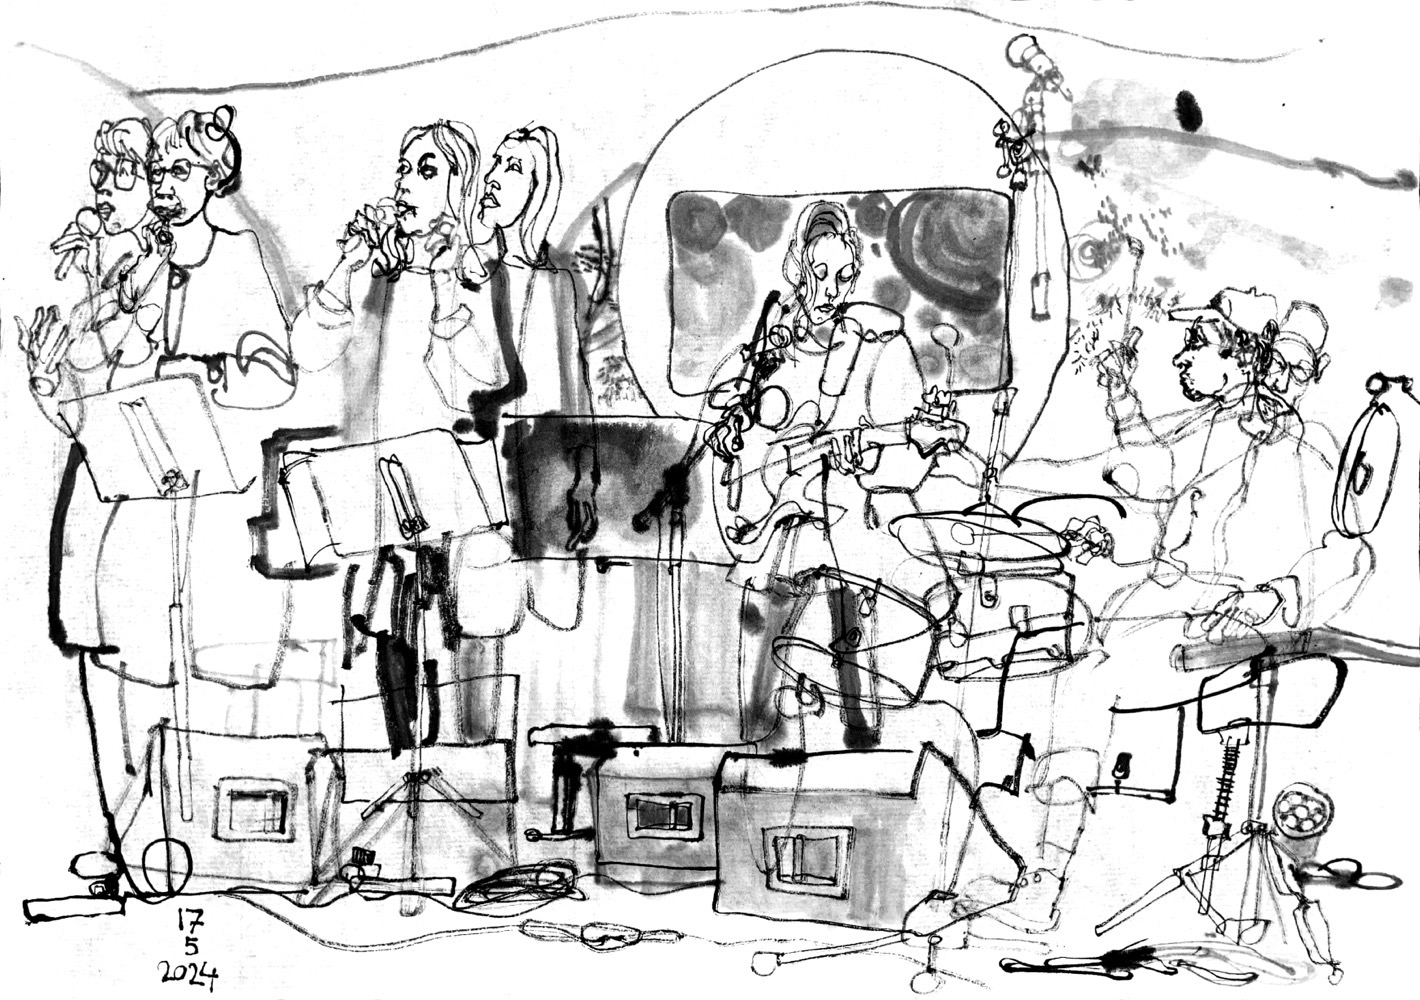 Ink drawing of musicians